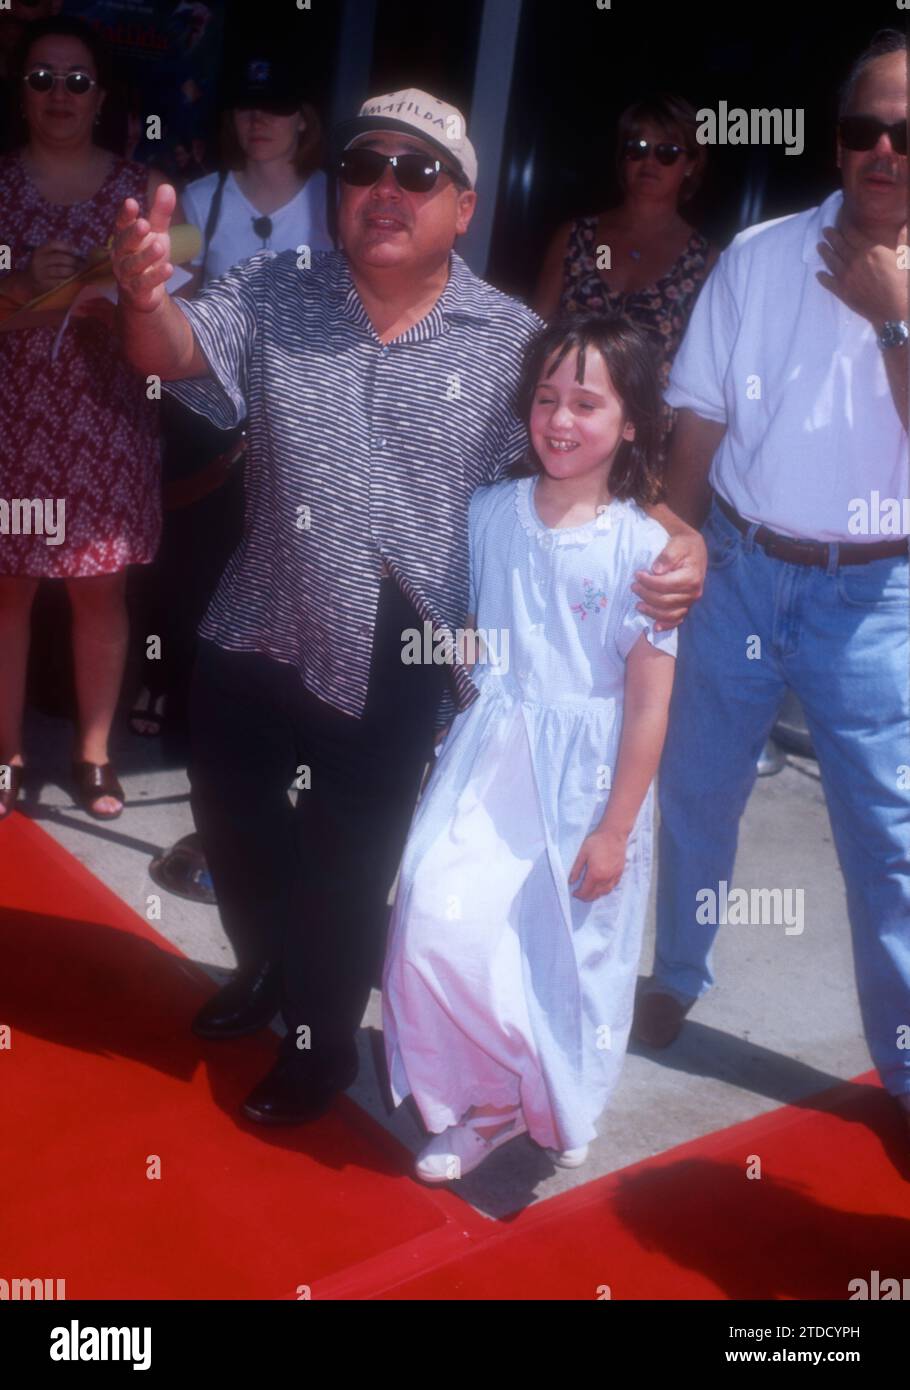 Culver City, California, USA 28th July 1996 Actor Danny DeVito and Actress Mara Wilson attend Matilda Premiere at Mann Culver Theater on July 28, 1996 in Cuvler City, California, USA. Photo by Barry King/Alamy Stock Photo Stock Photo